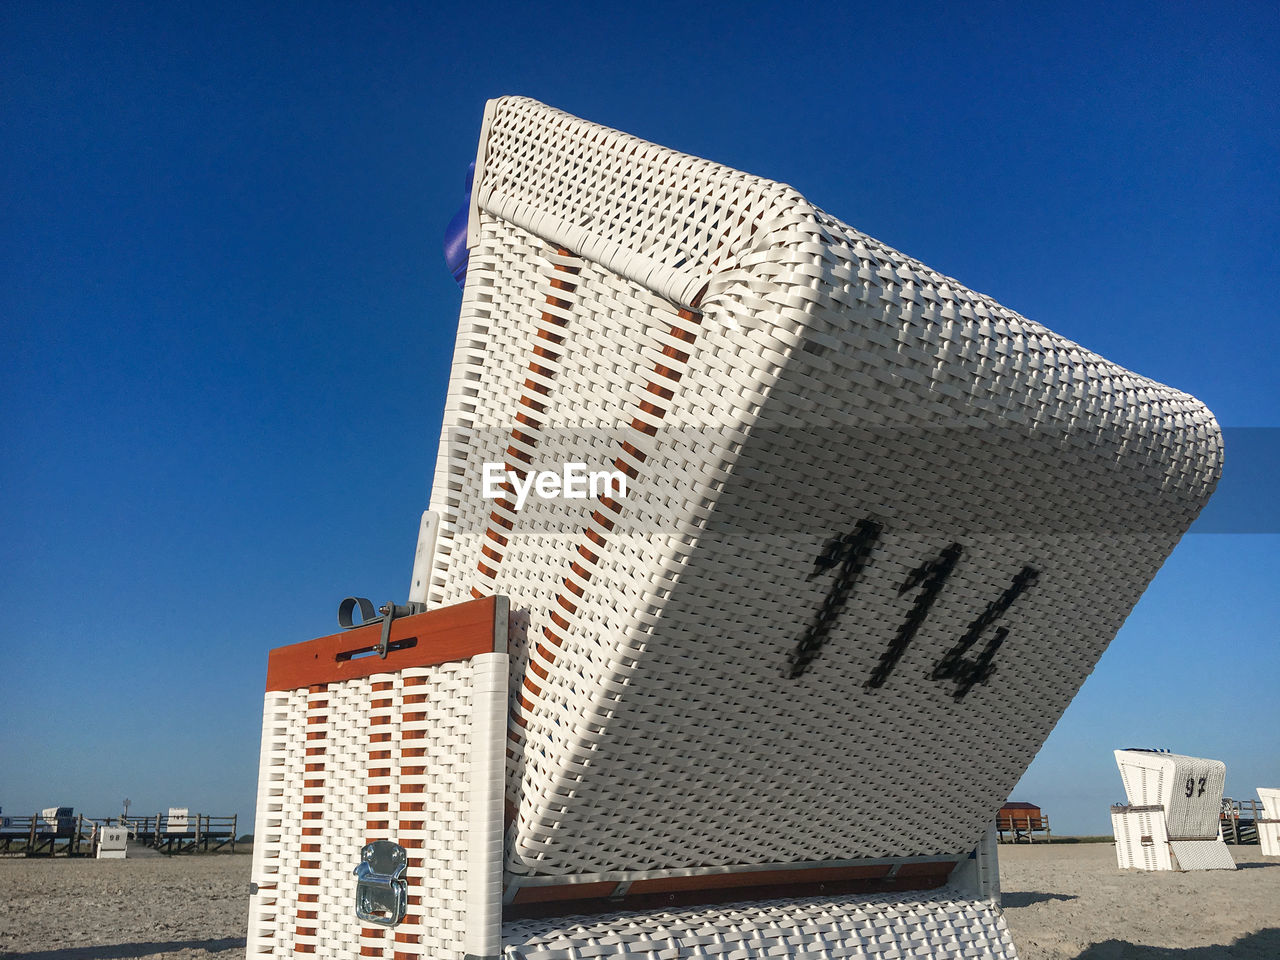 Traditional north german white beach chair with black number 114 at north sea beach against blue sky